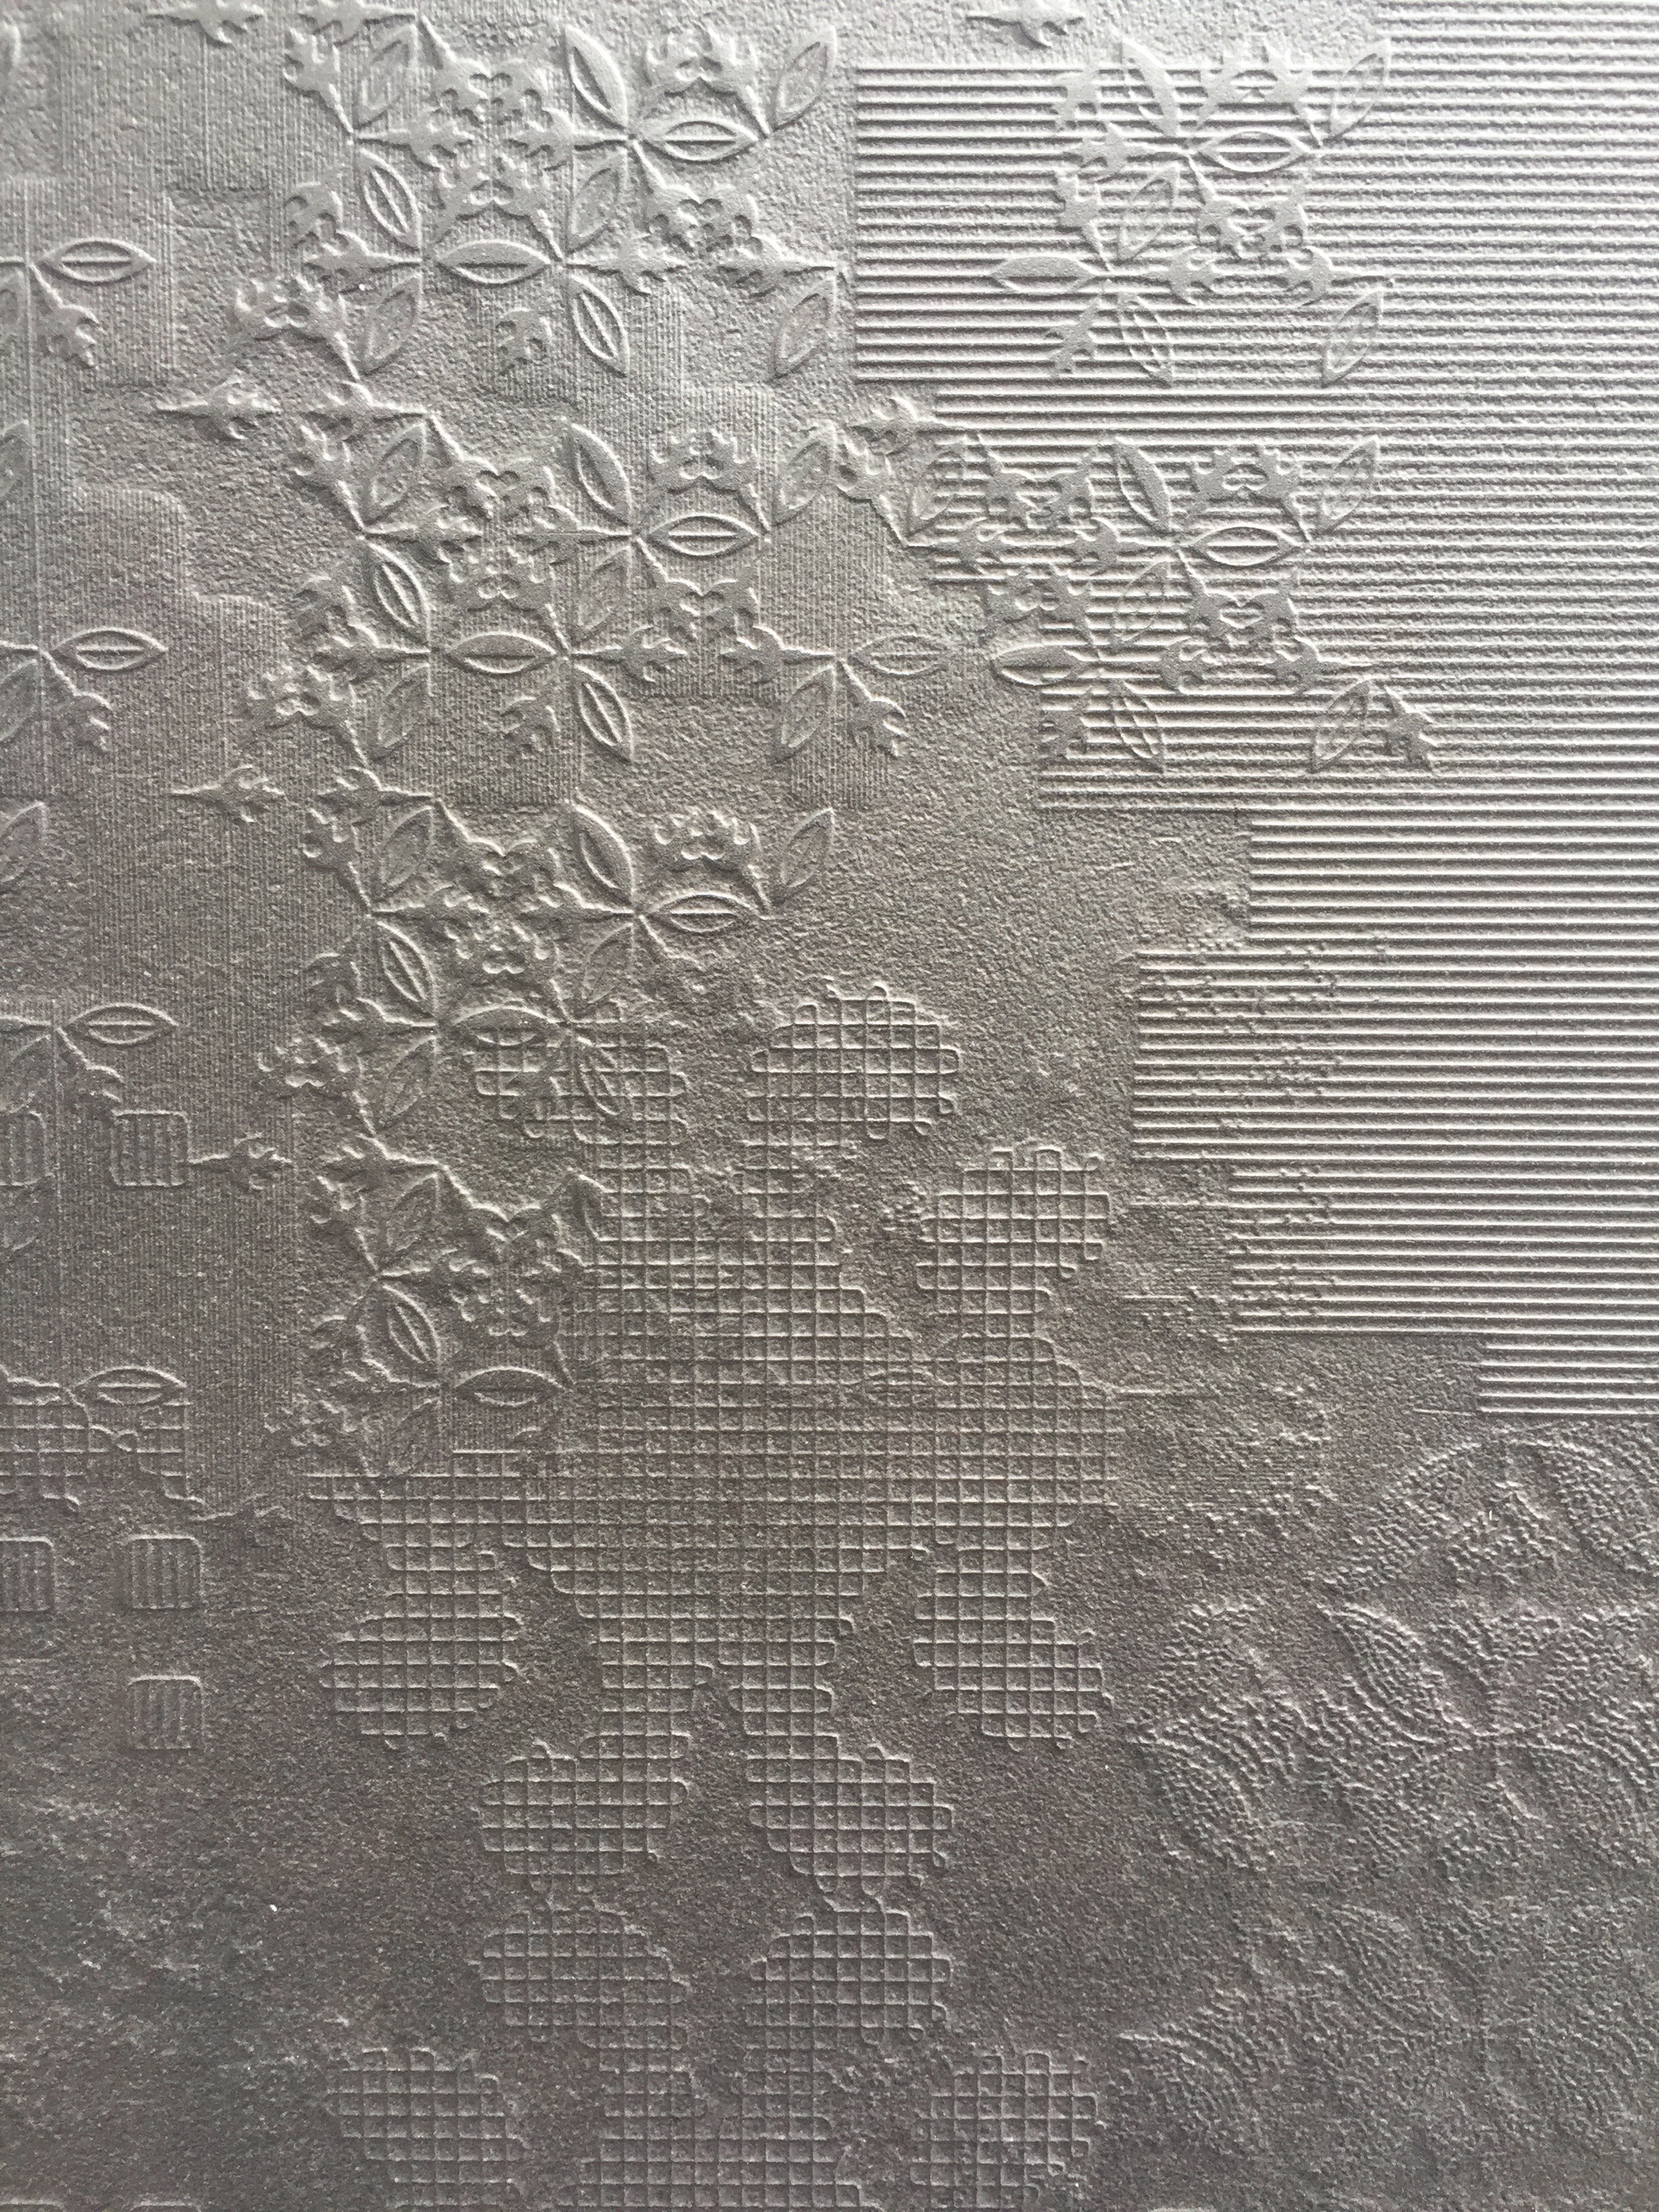 Close up of a paper texture. Silver decorative paper.